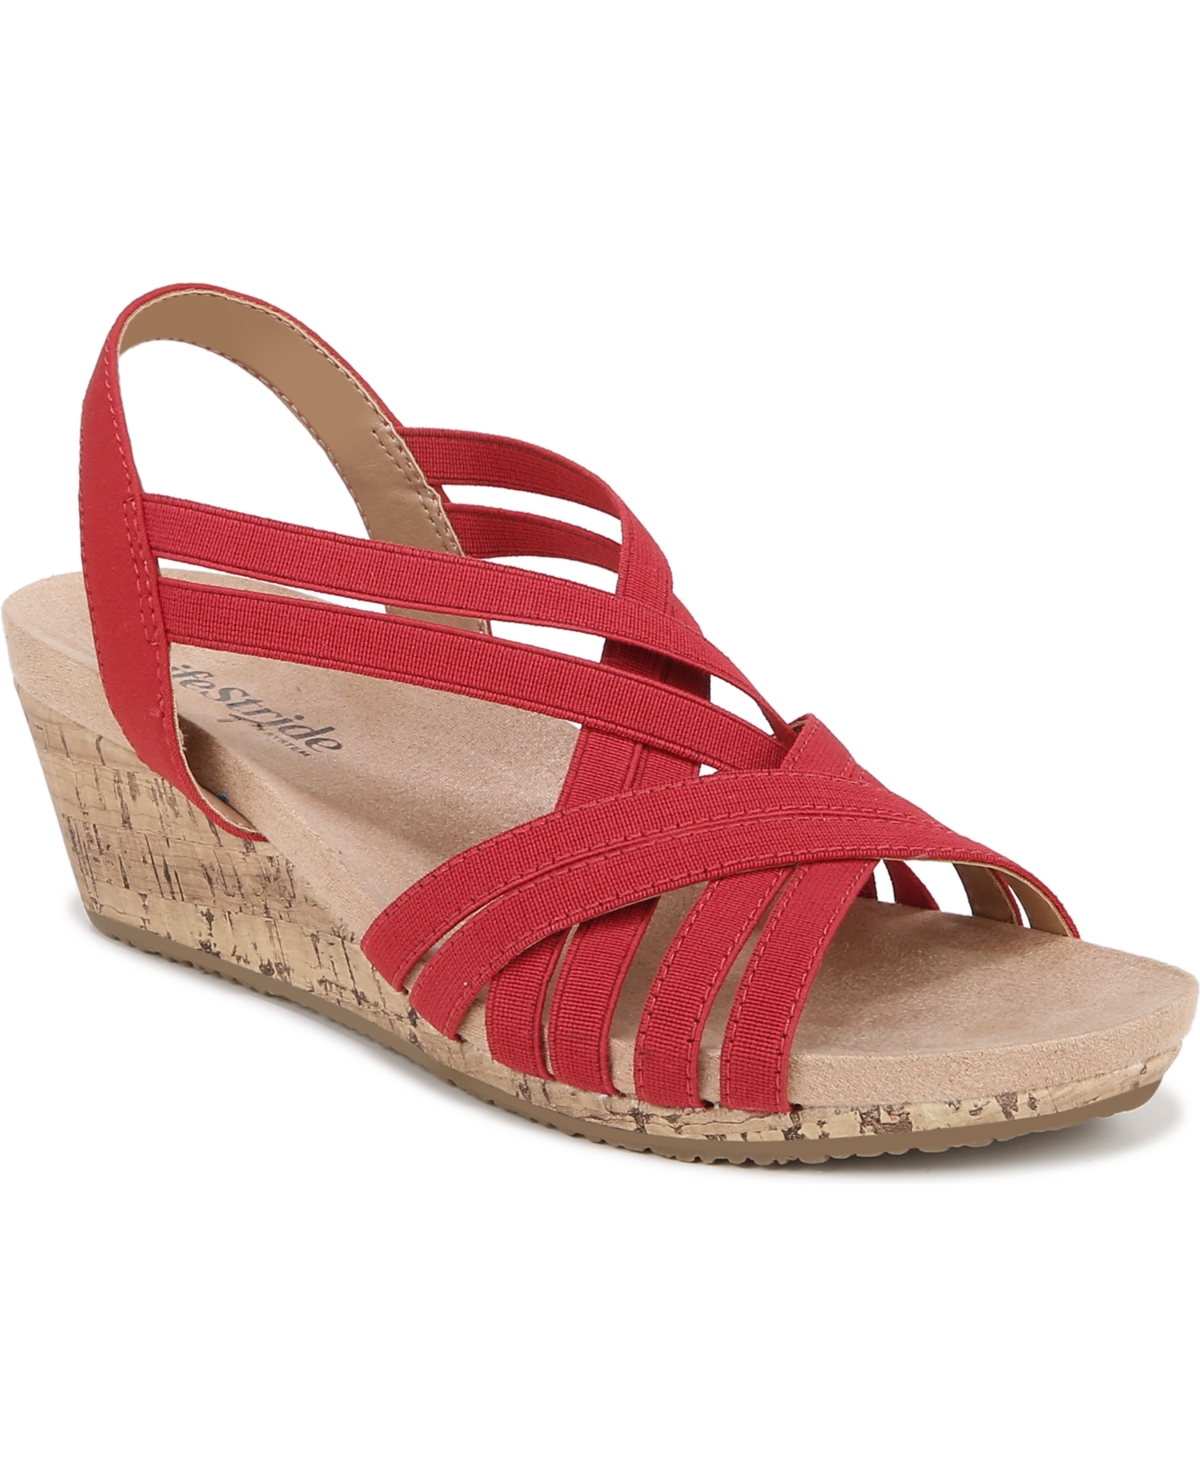 Lifestride Mallory Strappy Wedge Sandals In Fire Red Fabric